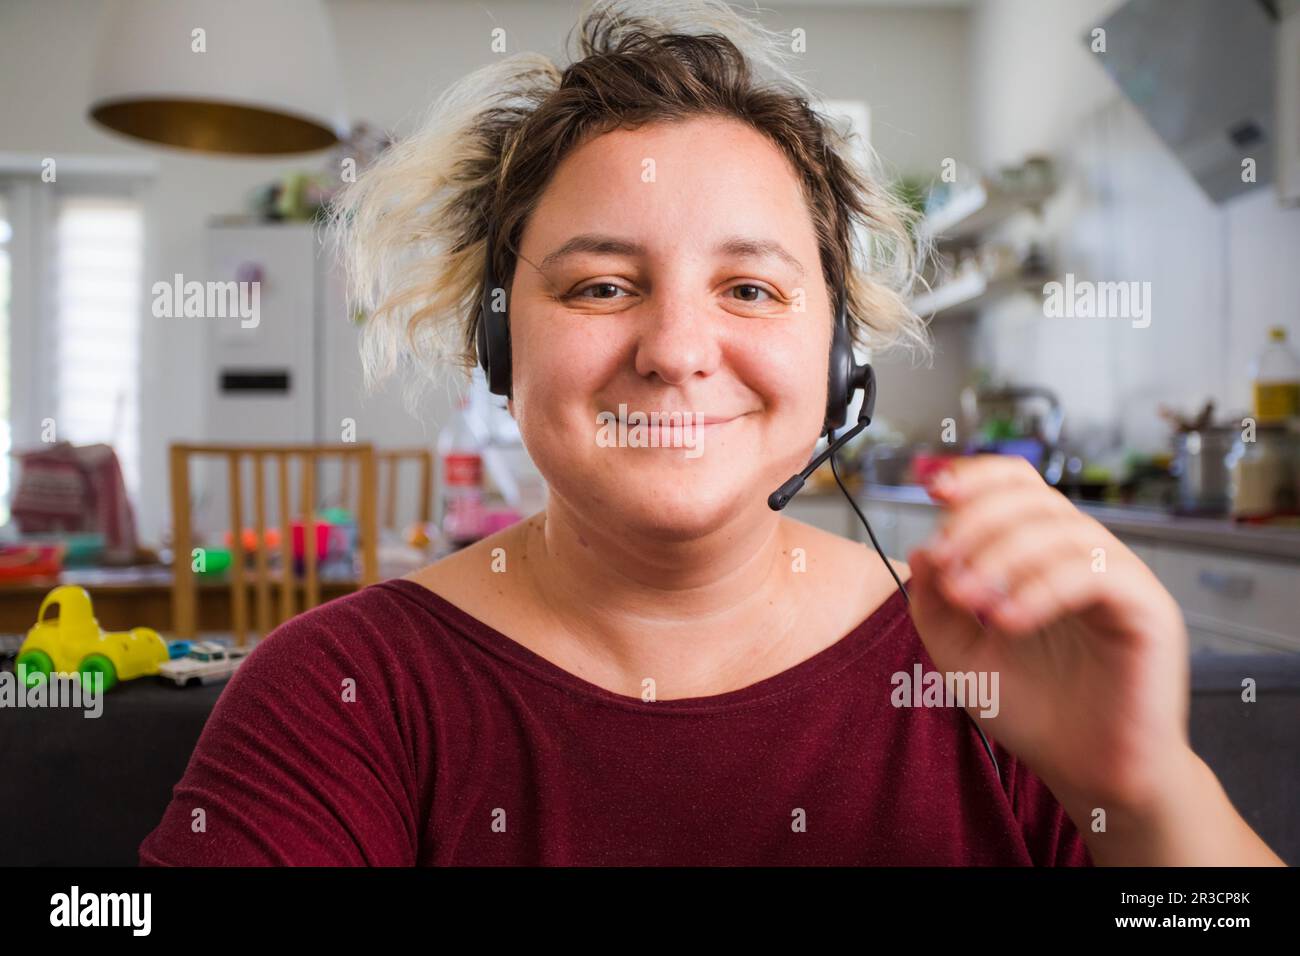 Woman combining remote work and raising kids Stock Photo